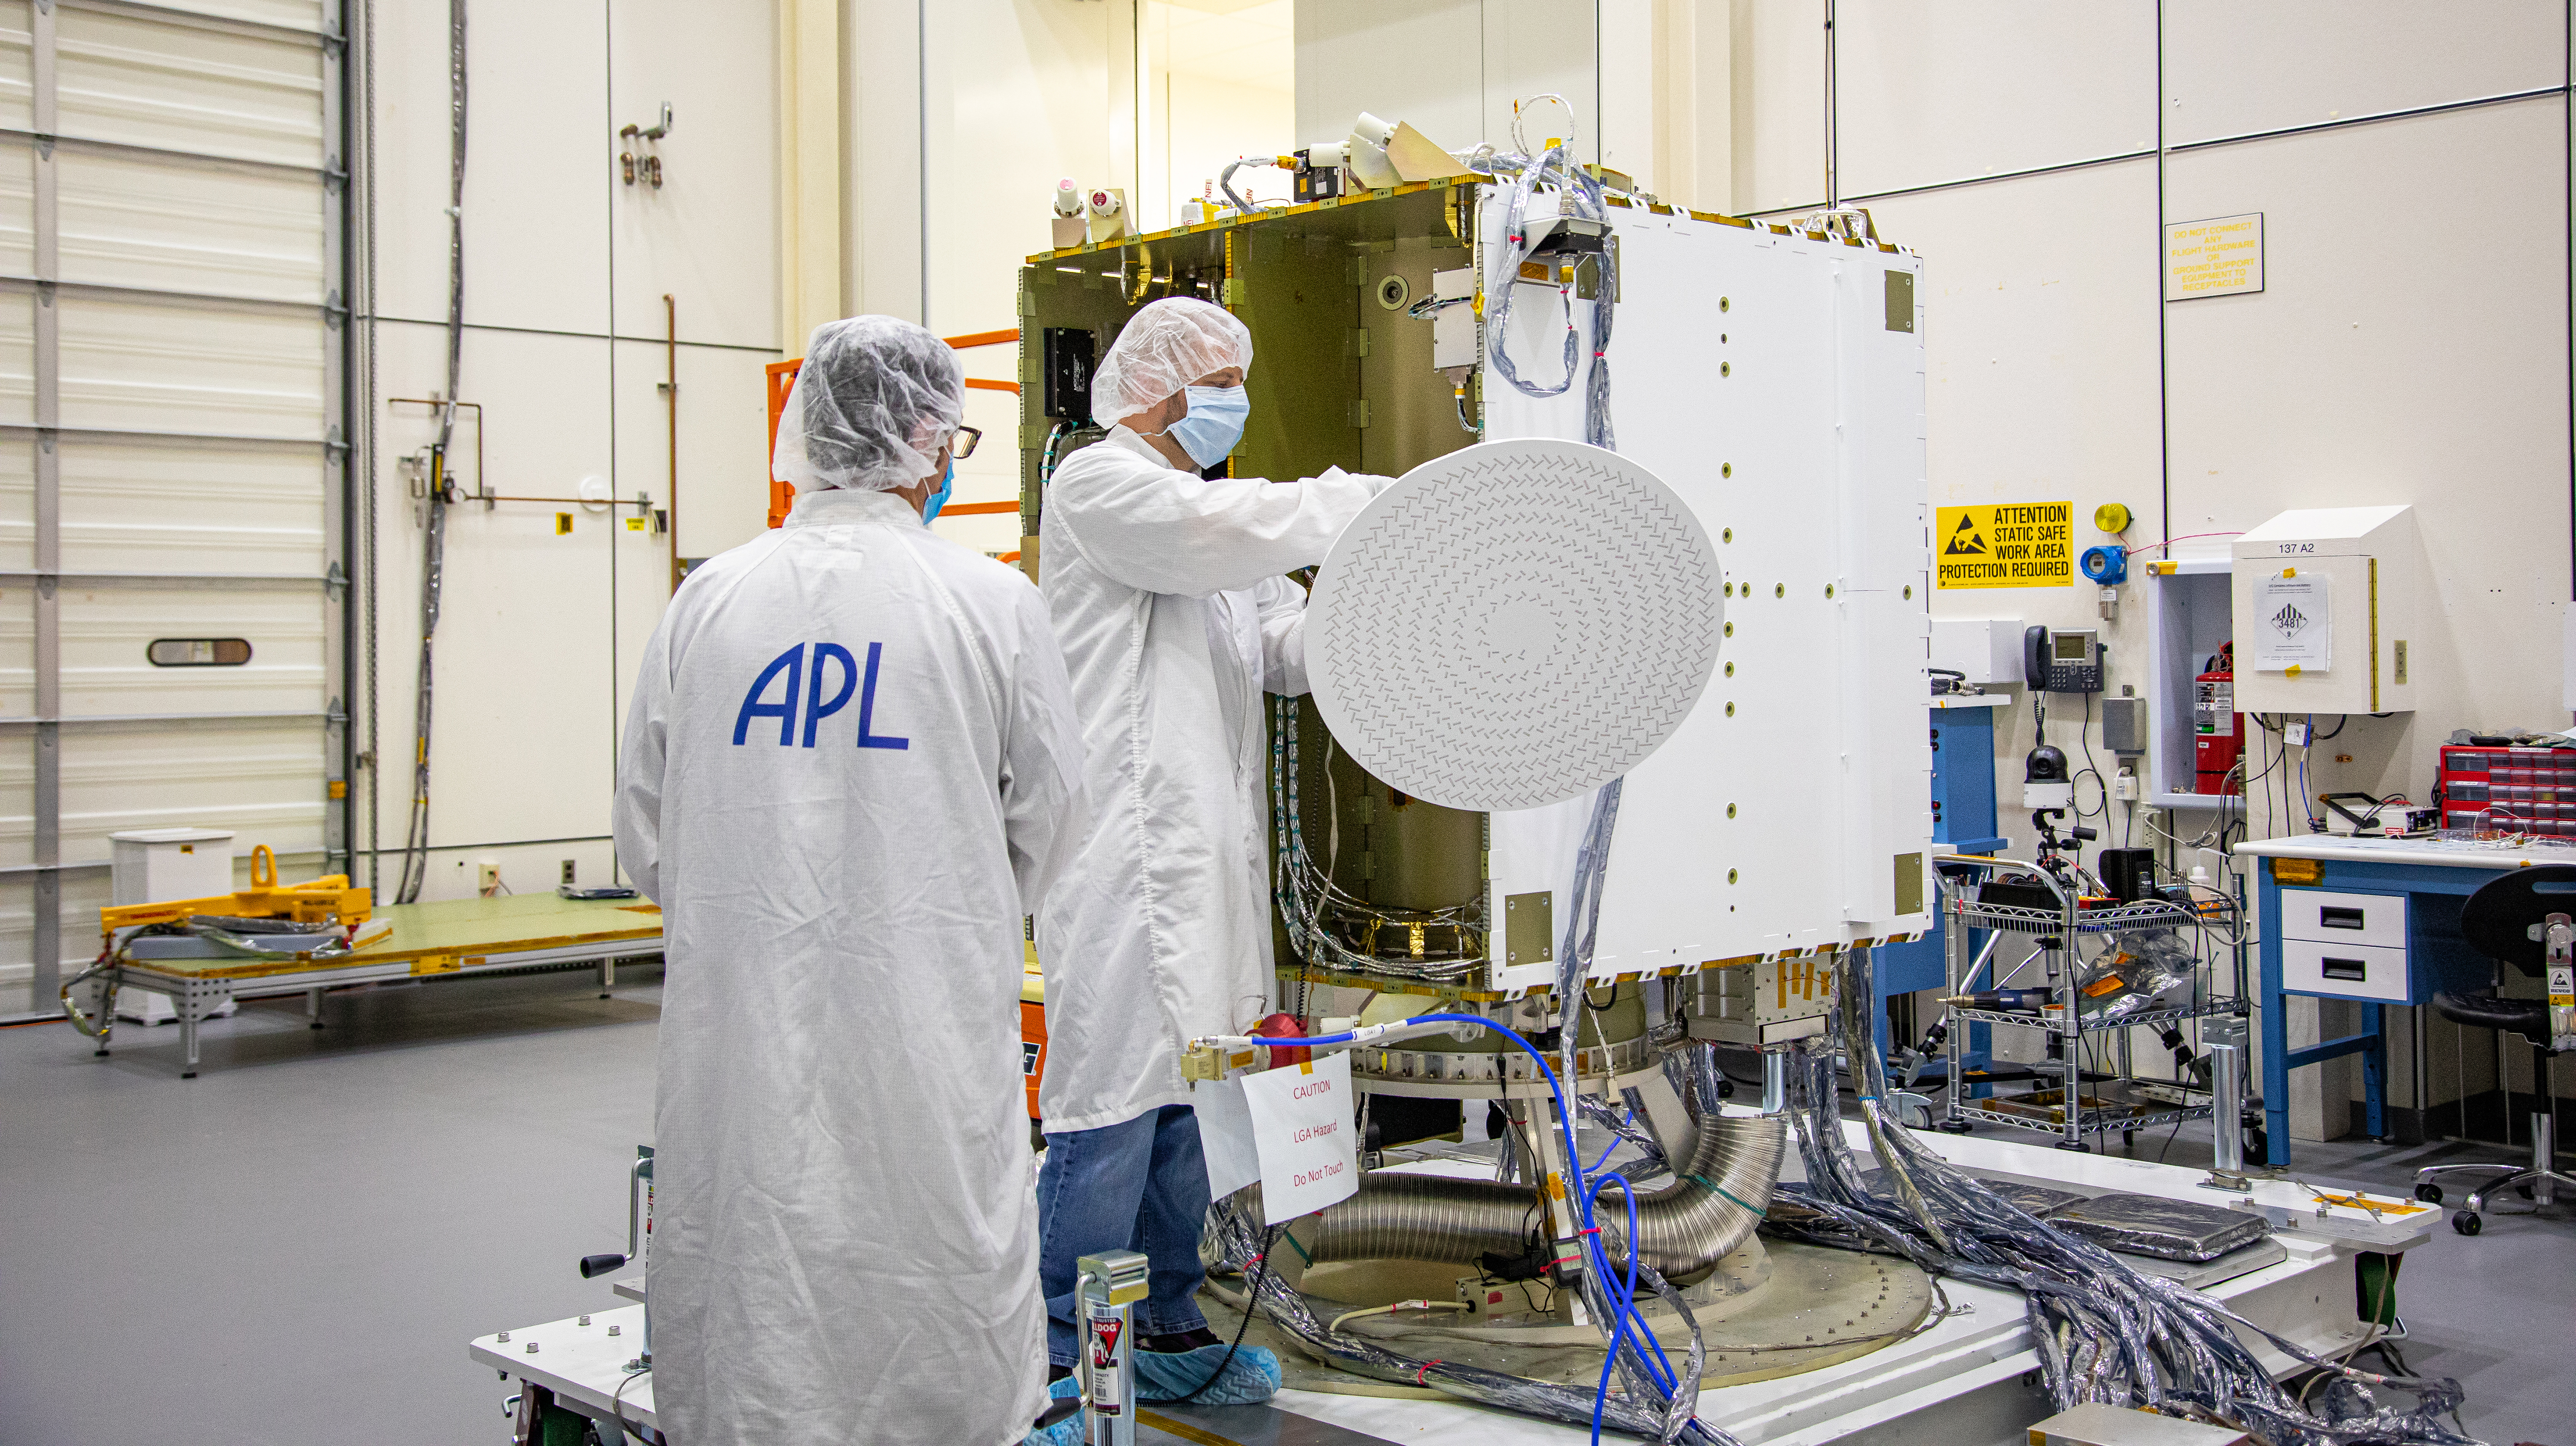 Two people in personal protective gear work on a part of the DART spacecraft